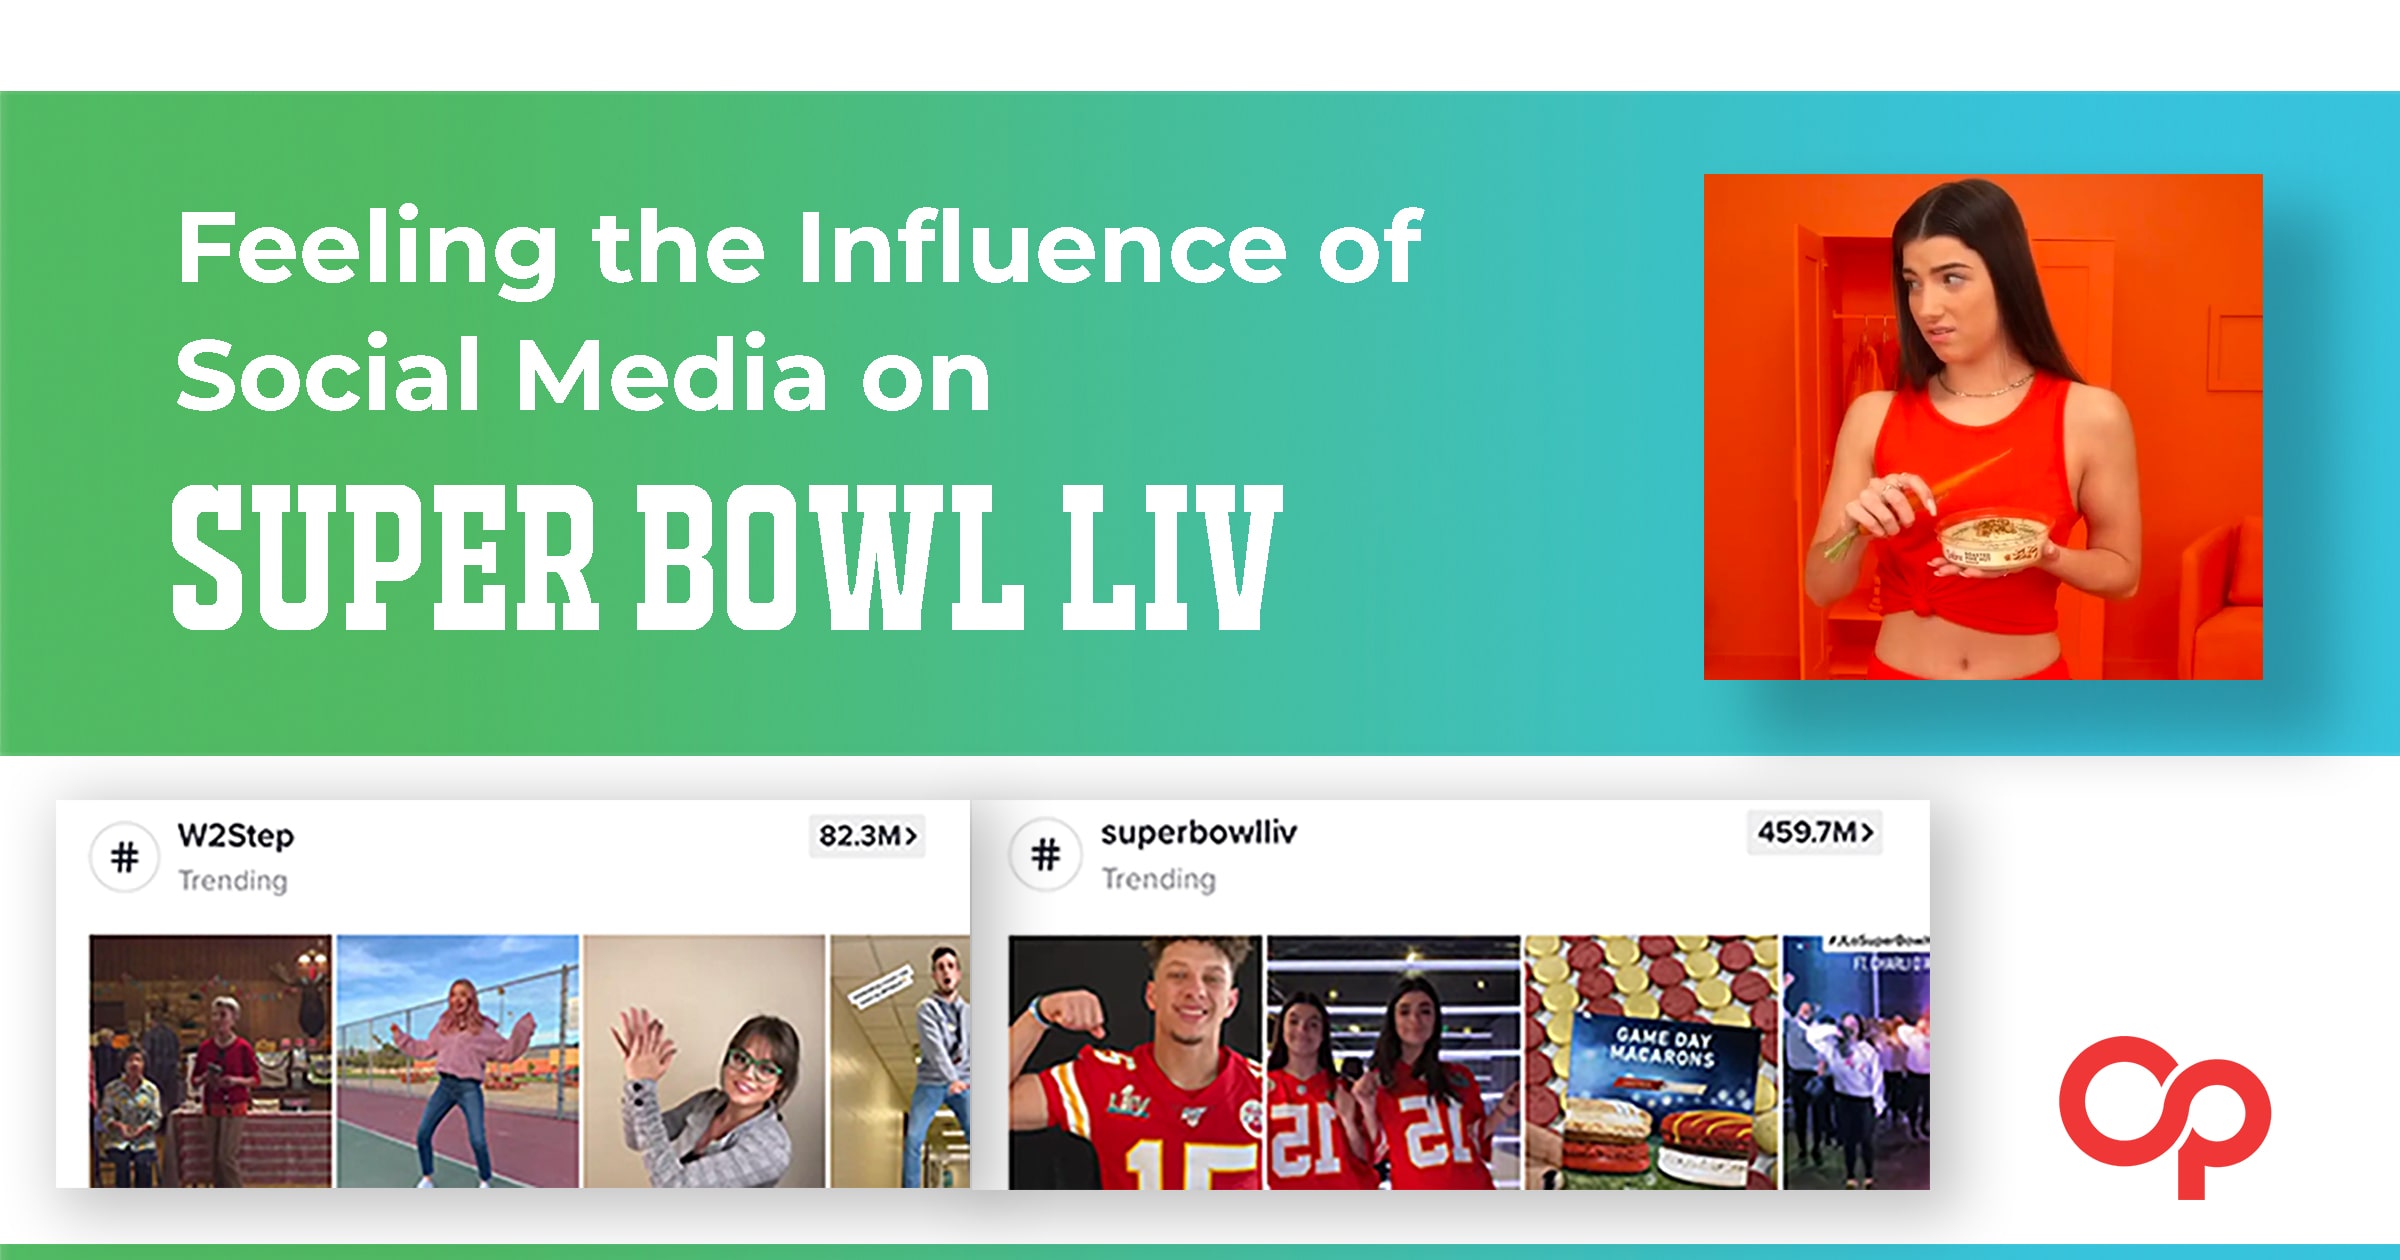 Could You Feel Social Media’s Influence on Super Bowl LIV?